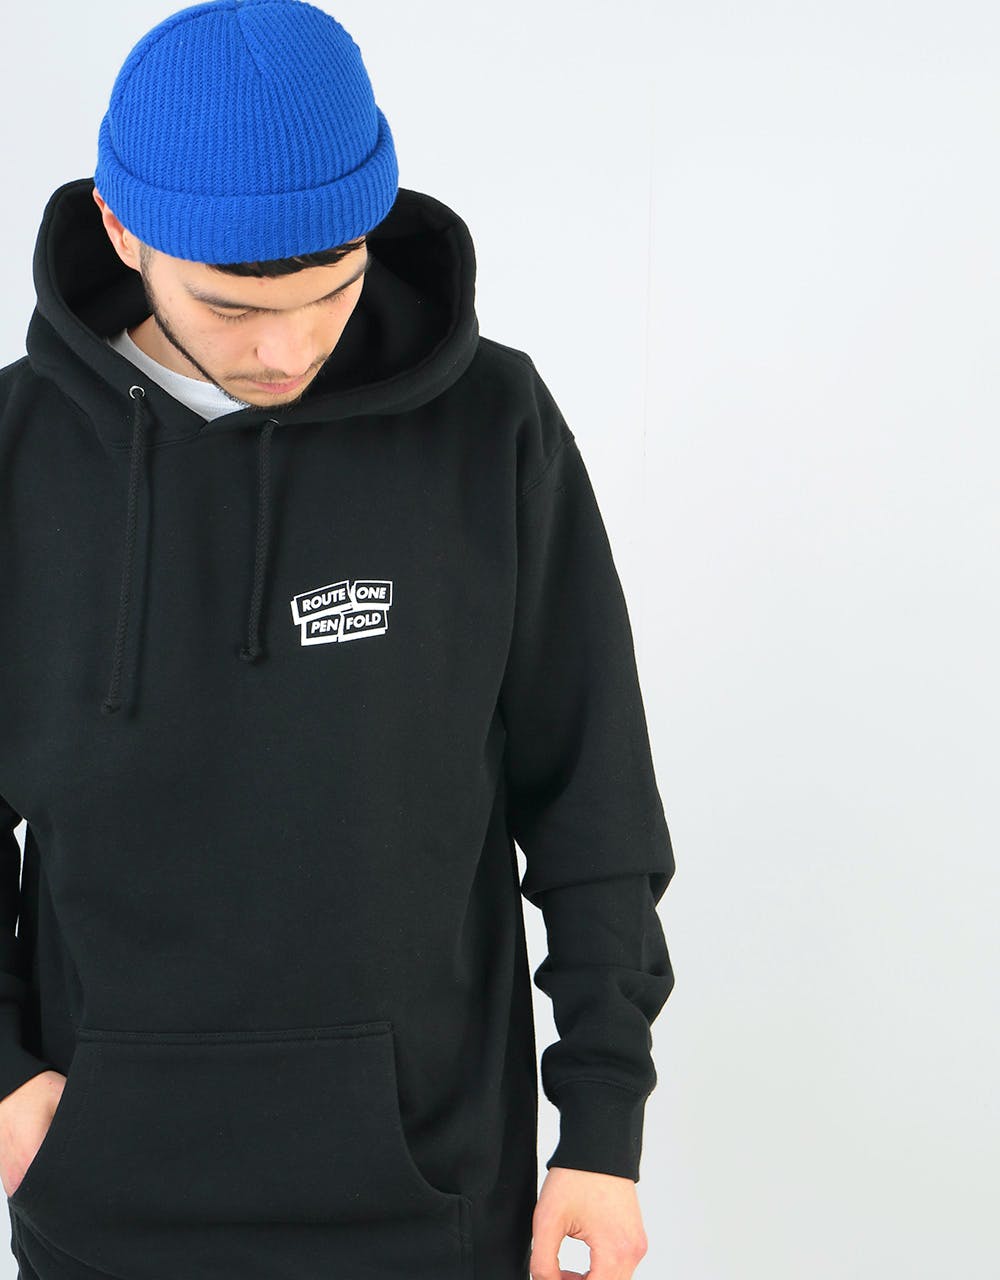 Route One x Mr. Penfold Tear Down Pullover Hoodie - Black